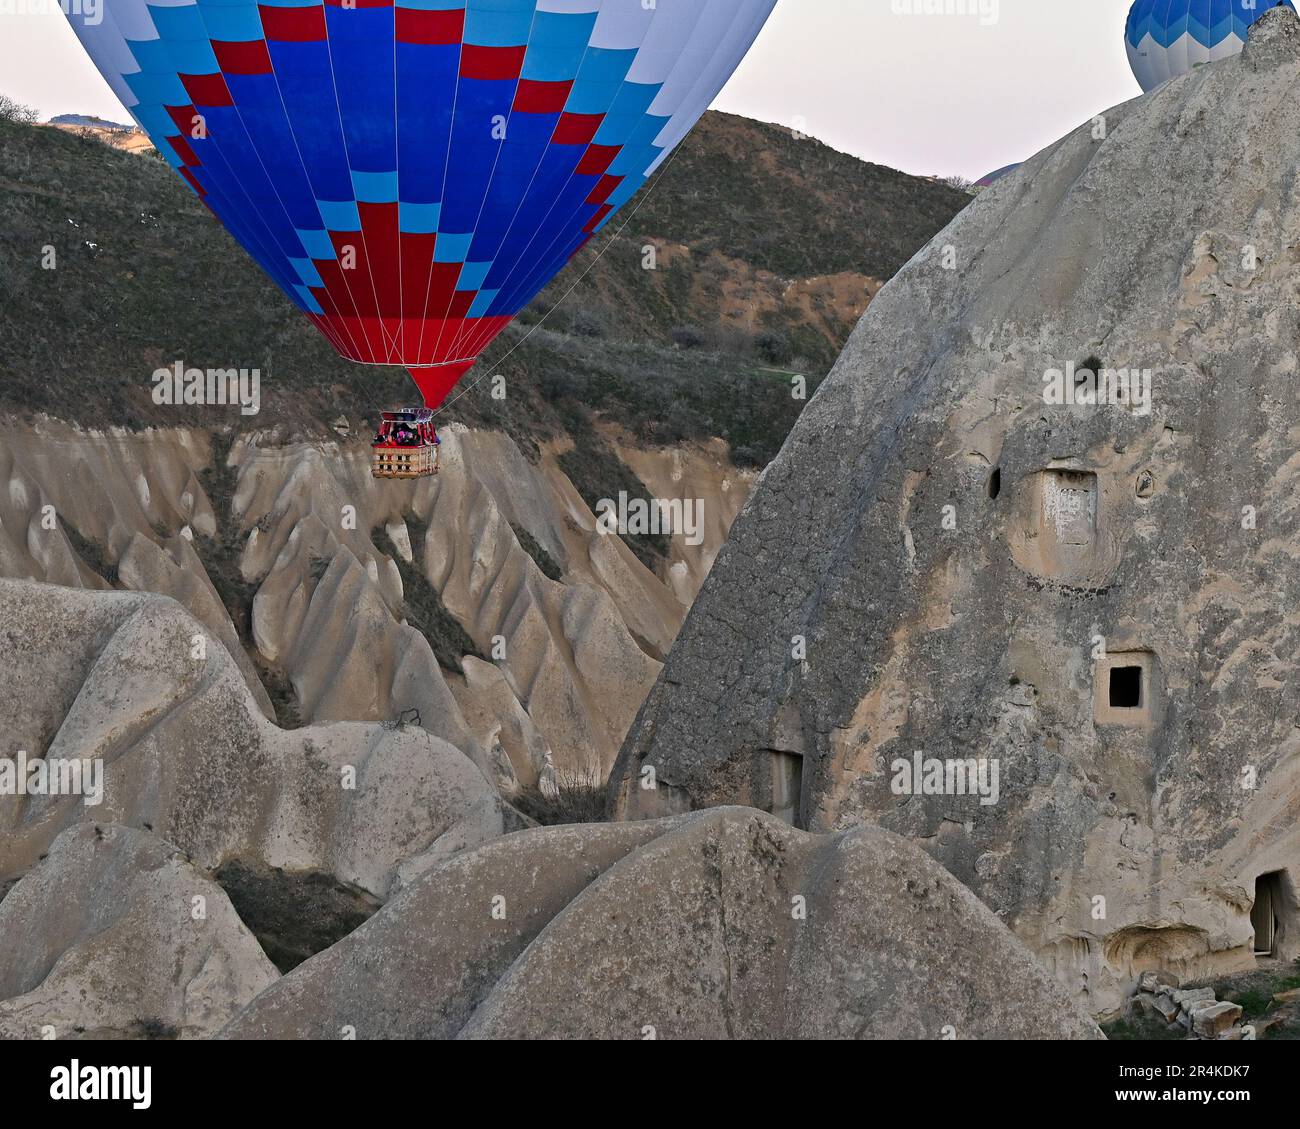 Hot air balloons flying past the ancient cave houses of the Zelve Open Air Museum, Capadoccia, Turkey Stock Photo